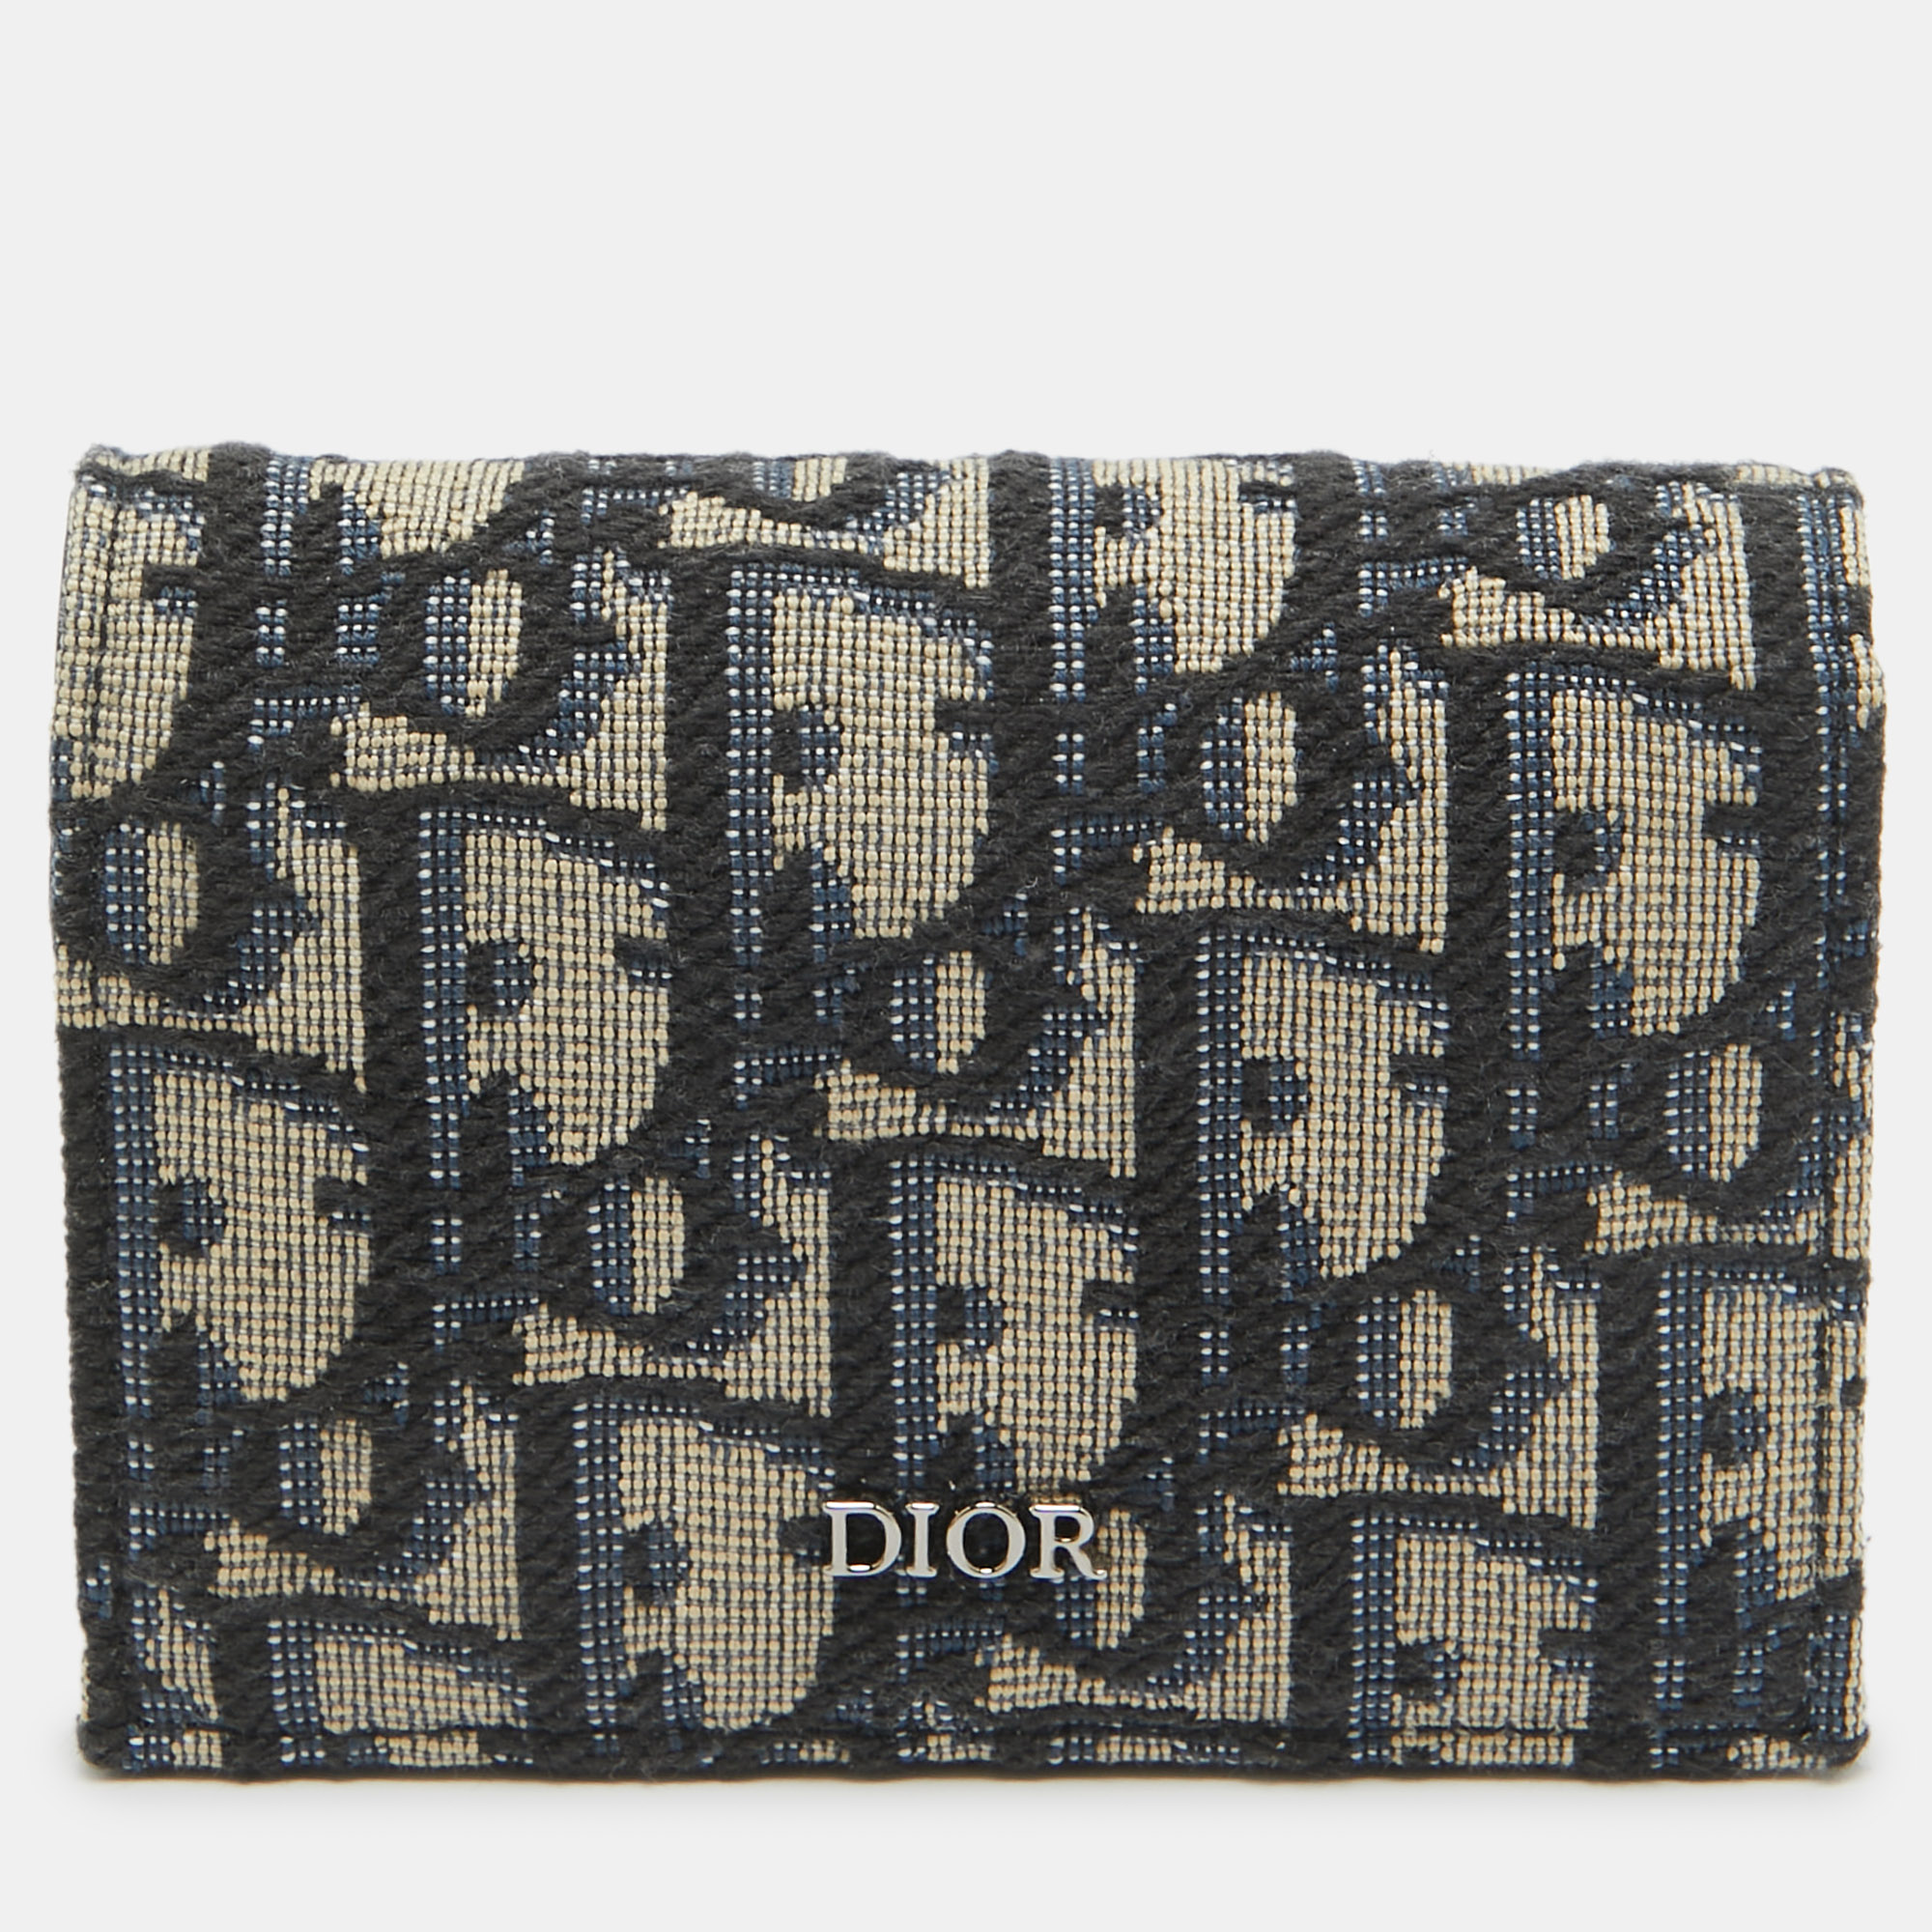 Dior navy blue/black oblique canvas and leather flap card case